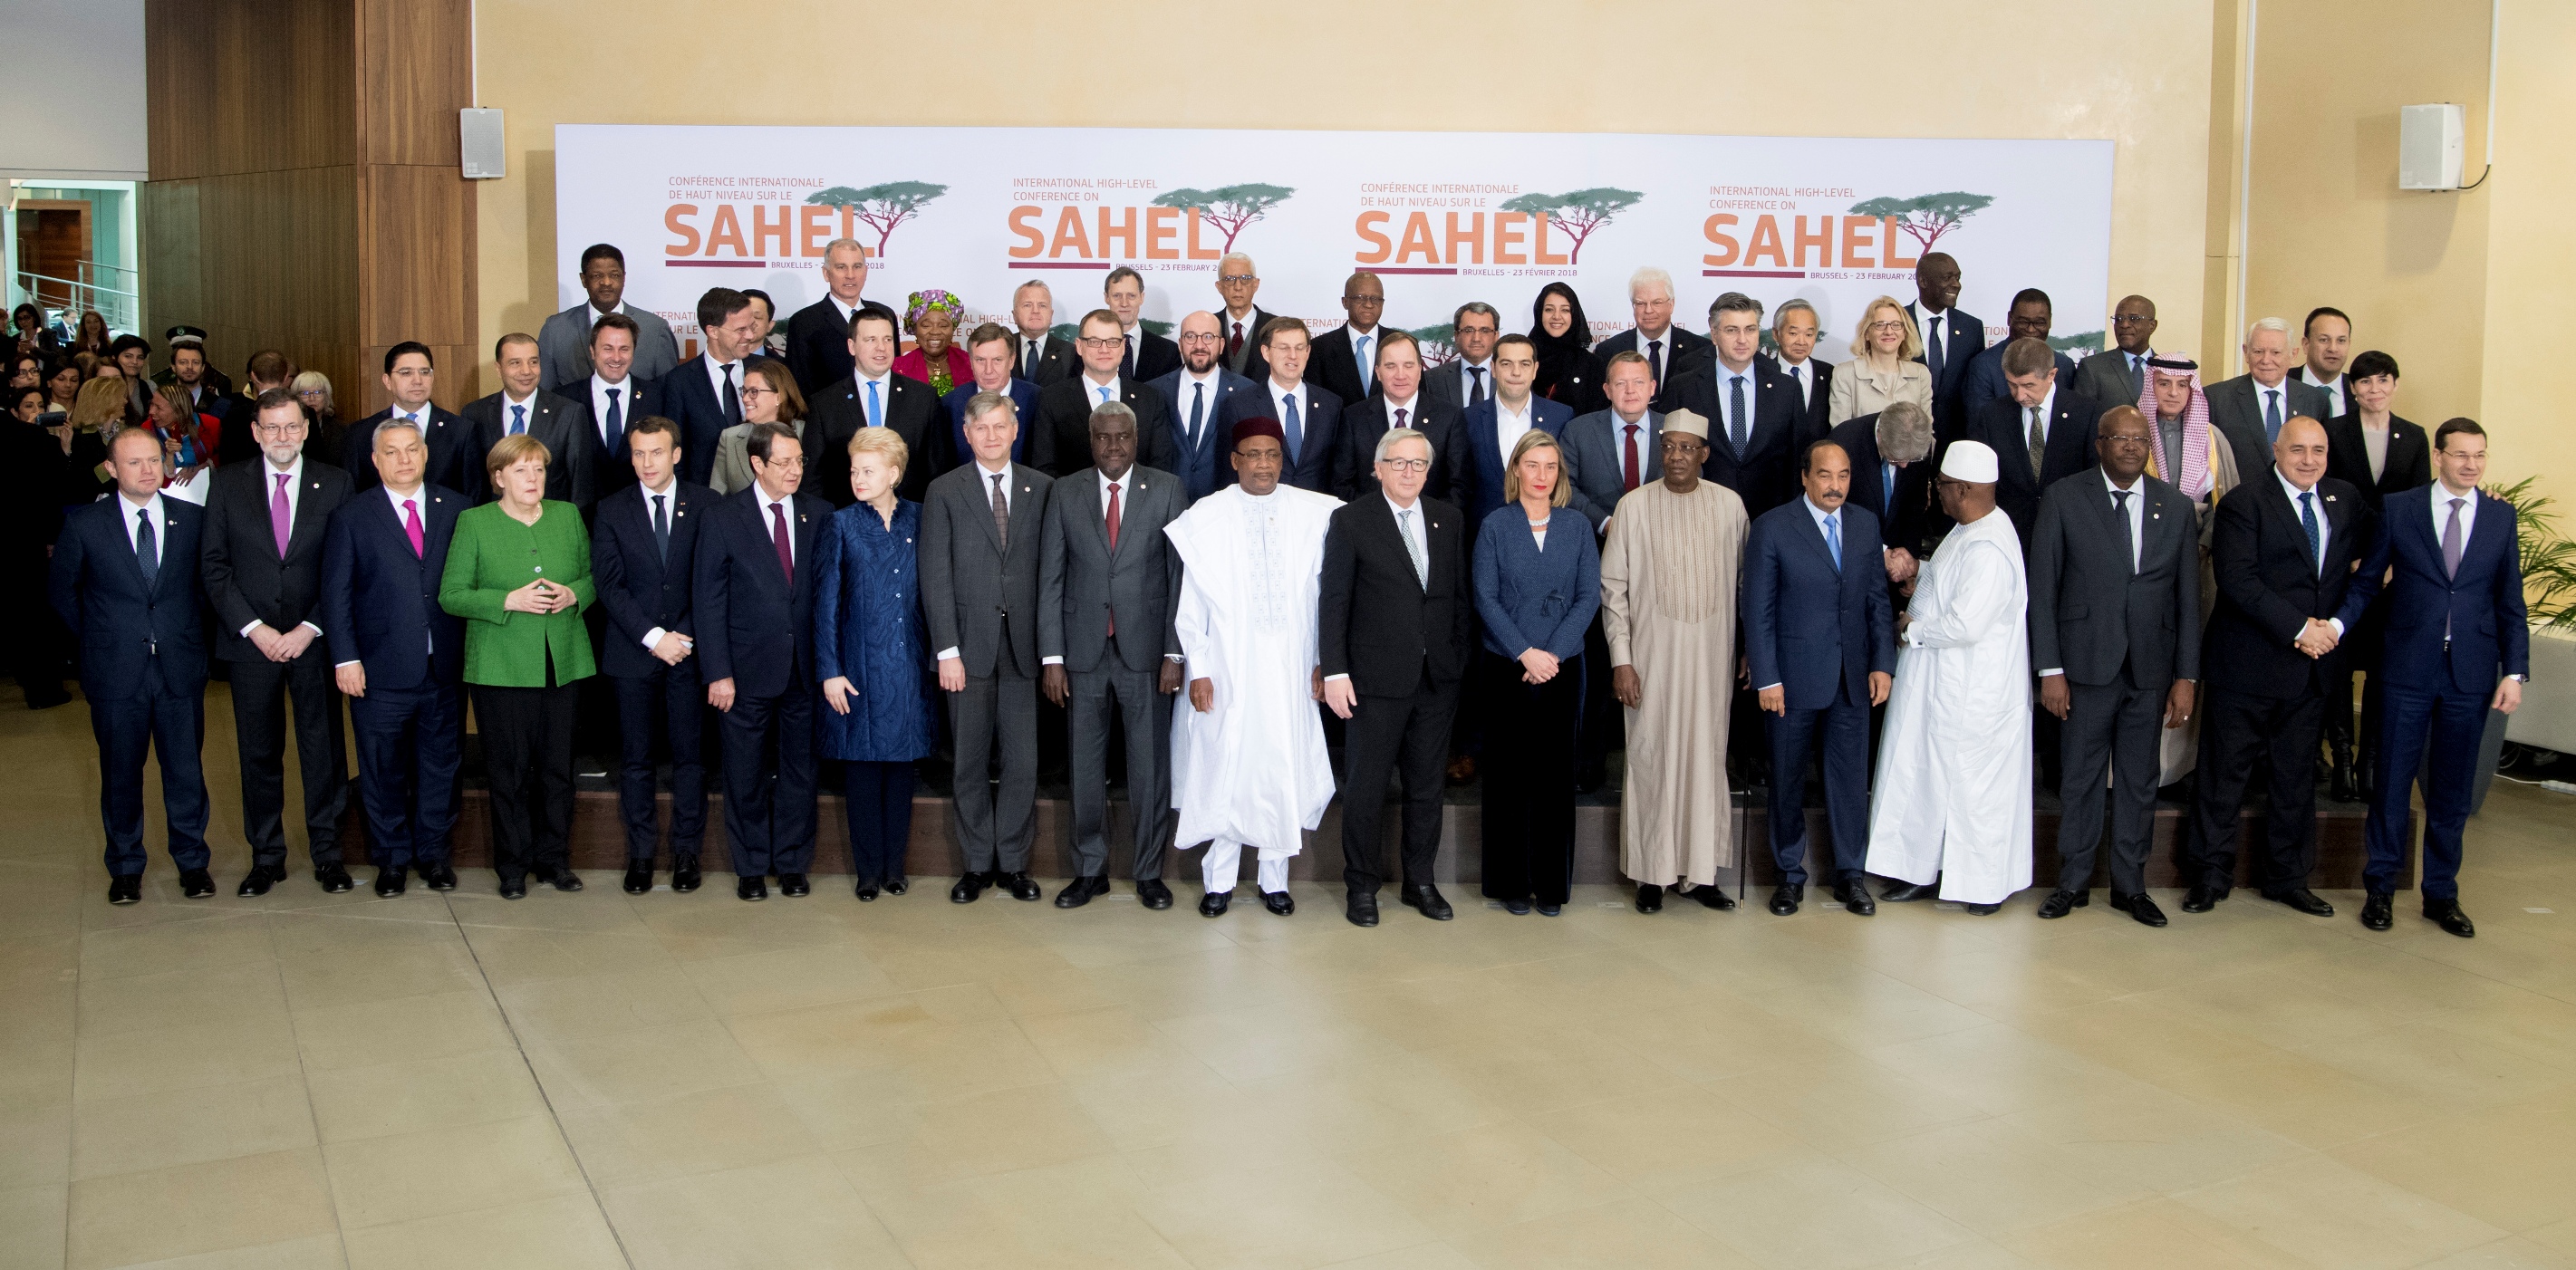 An International High Level Conference on the Sahel concluded in Brussels